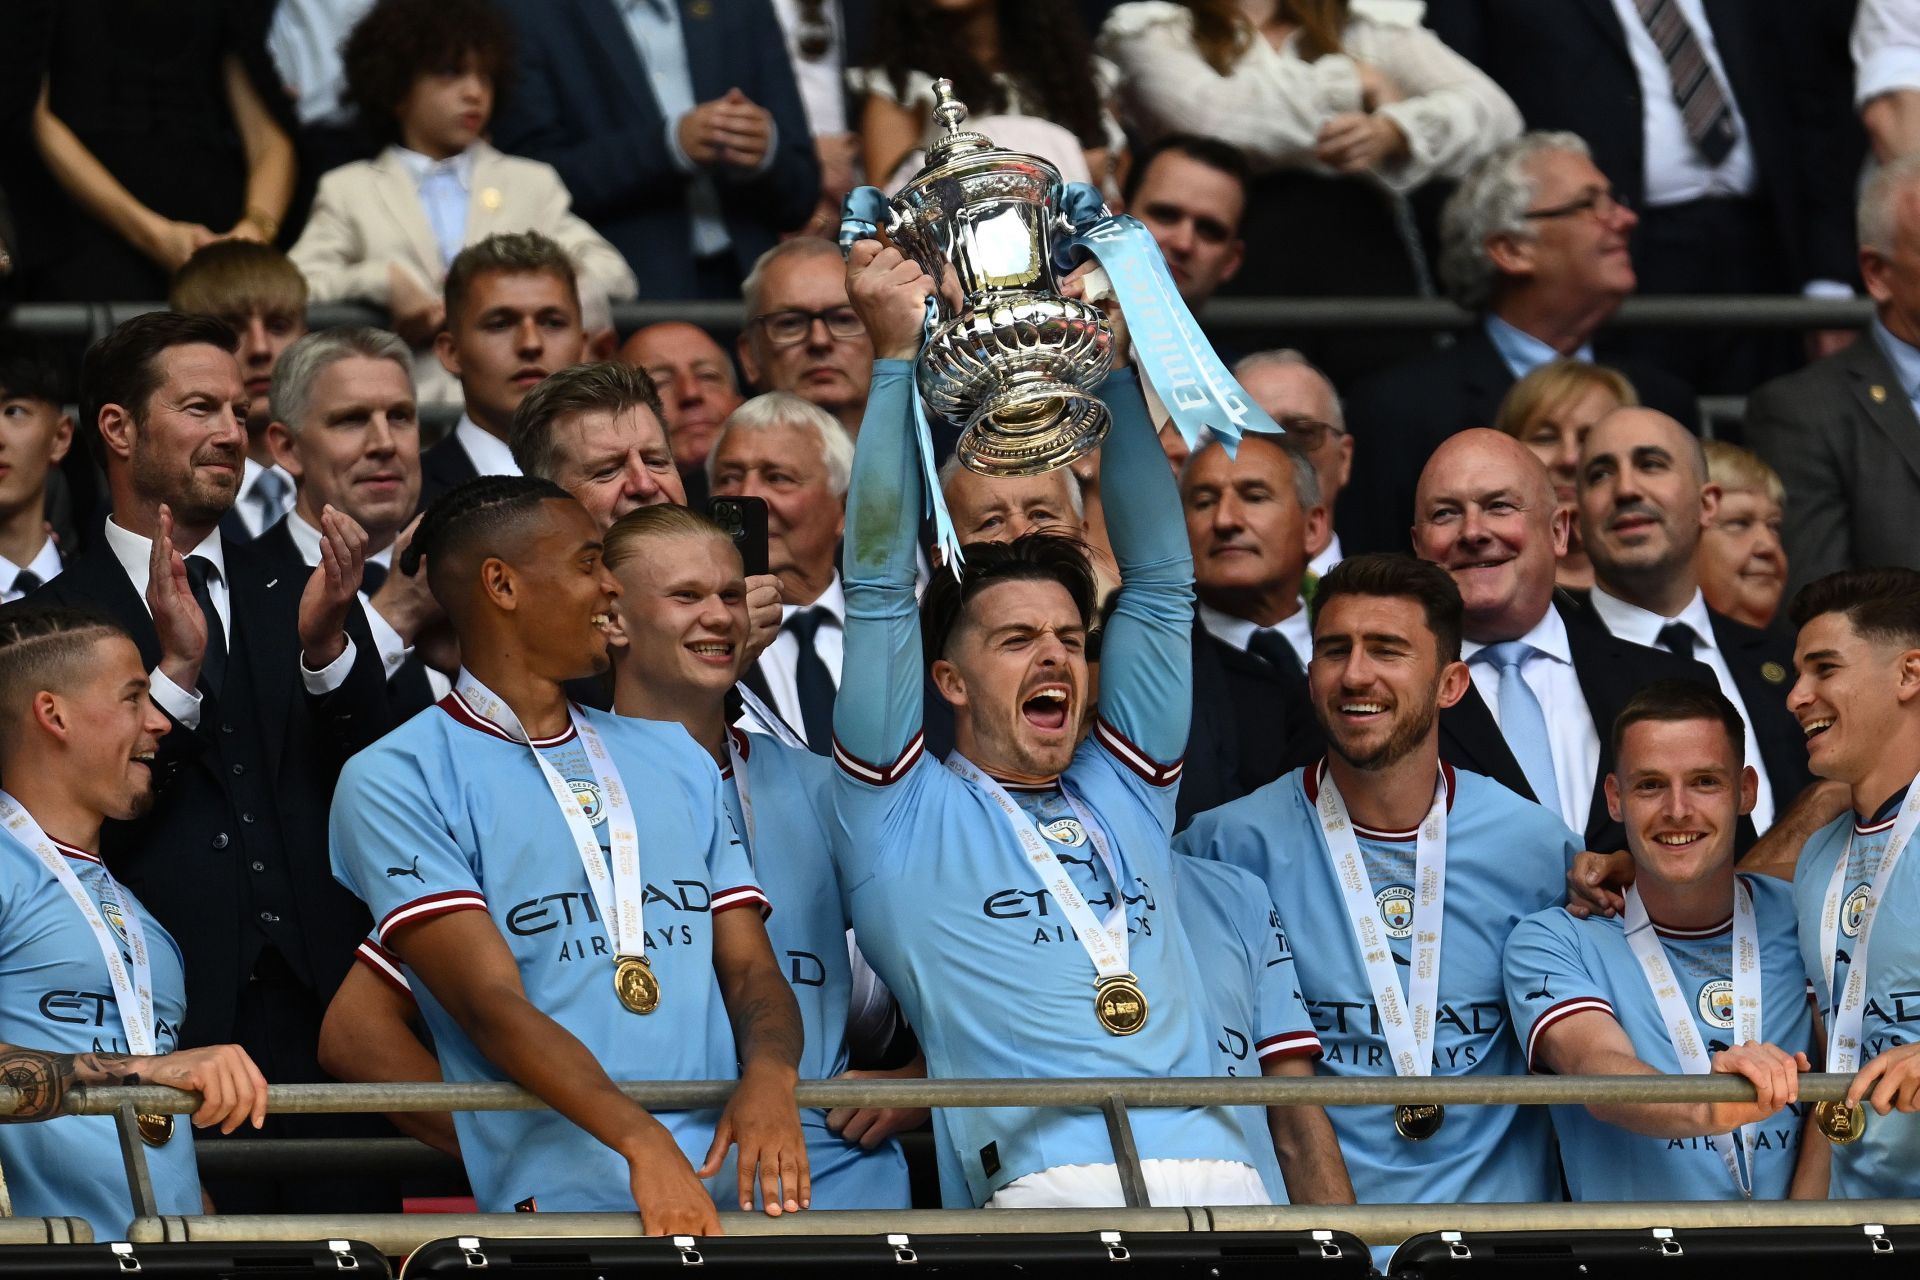 Jack Grealish has lifted four major trophies since signing for Manchester City in 2021, the same summer City pursued a transfer for Harry Kane